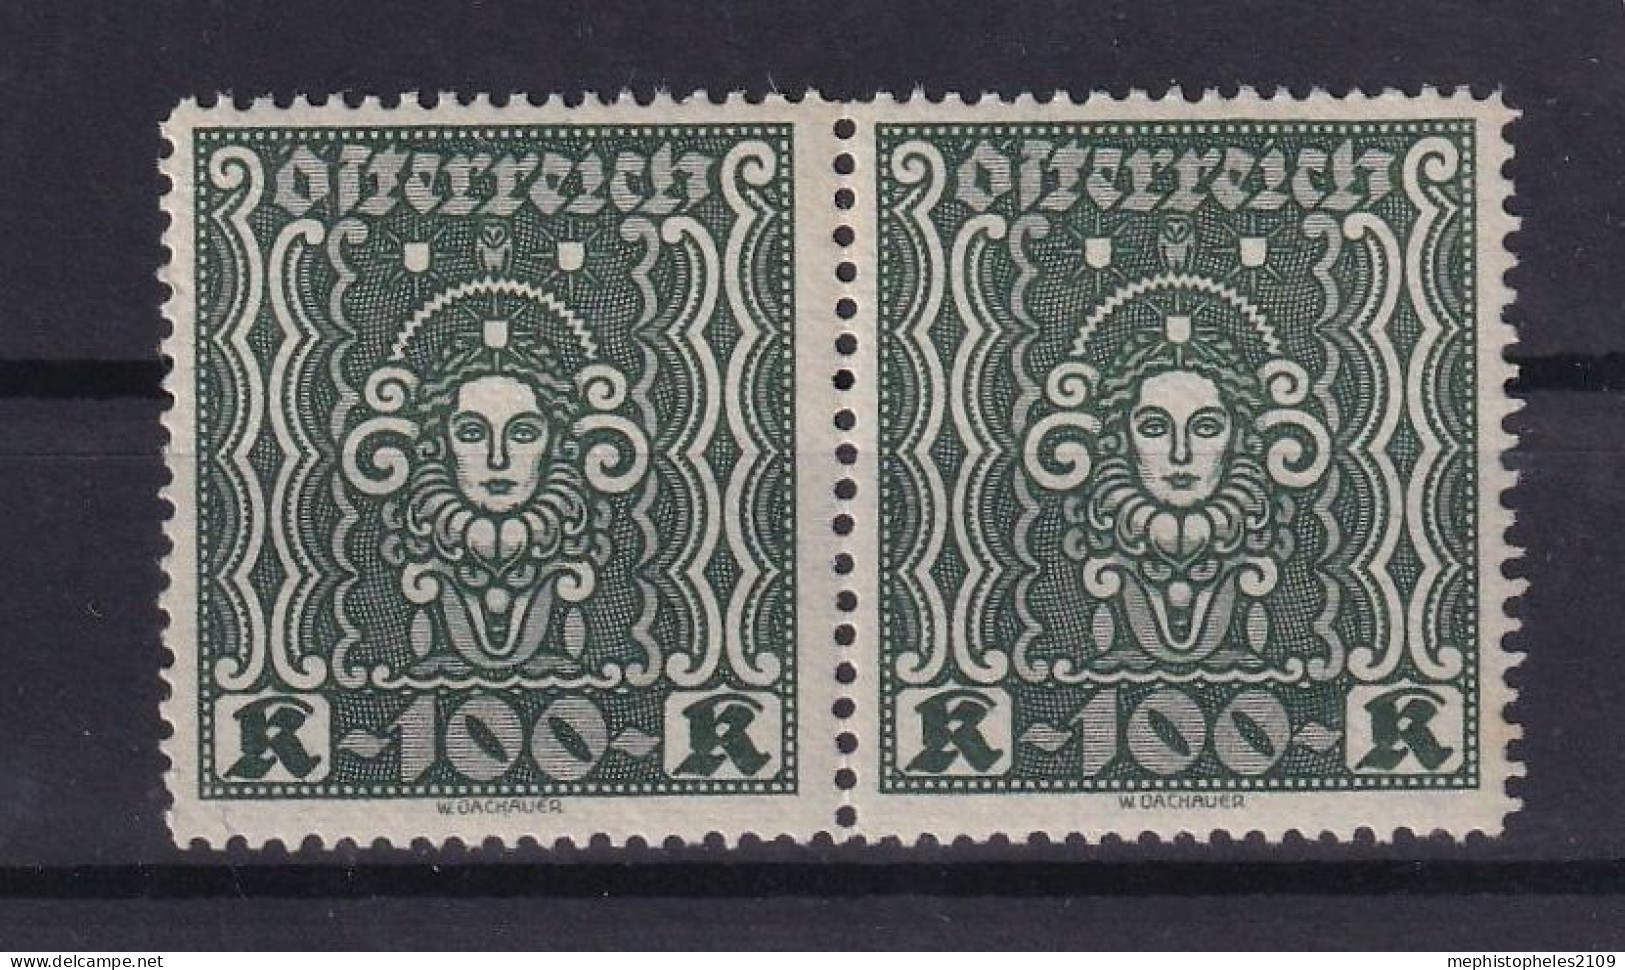 AUSTRIA 1922/24 - MNH - ANK 401a II - Pair! - Unused Stamps